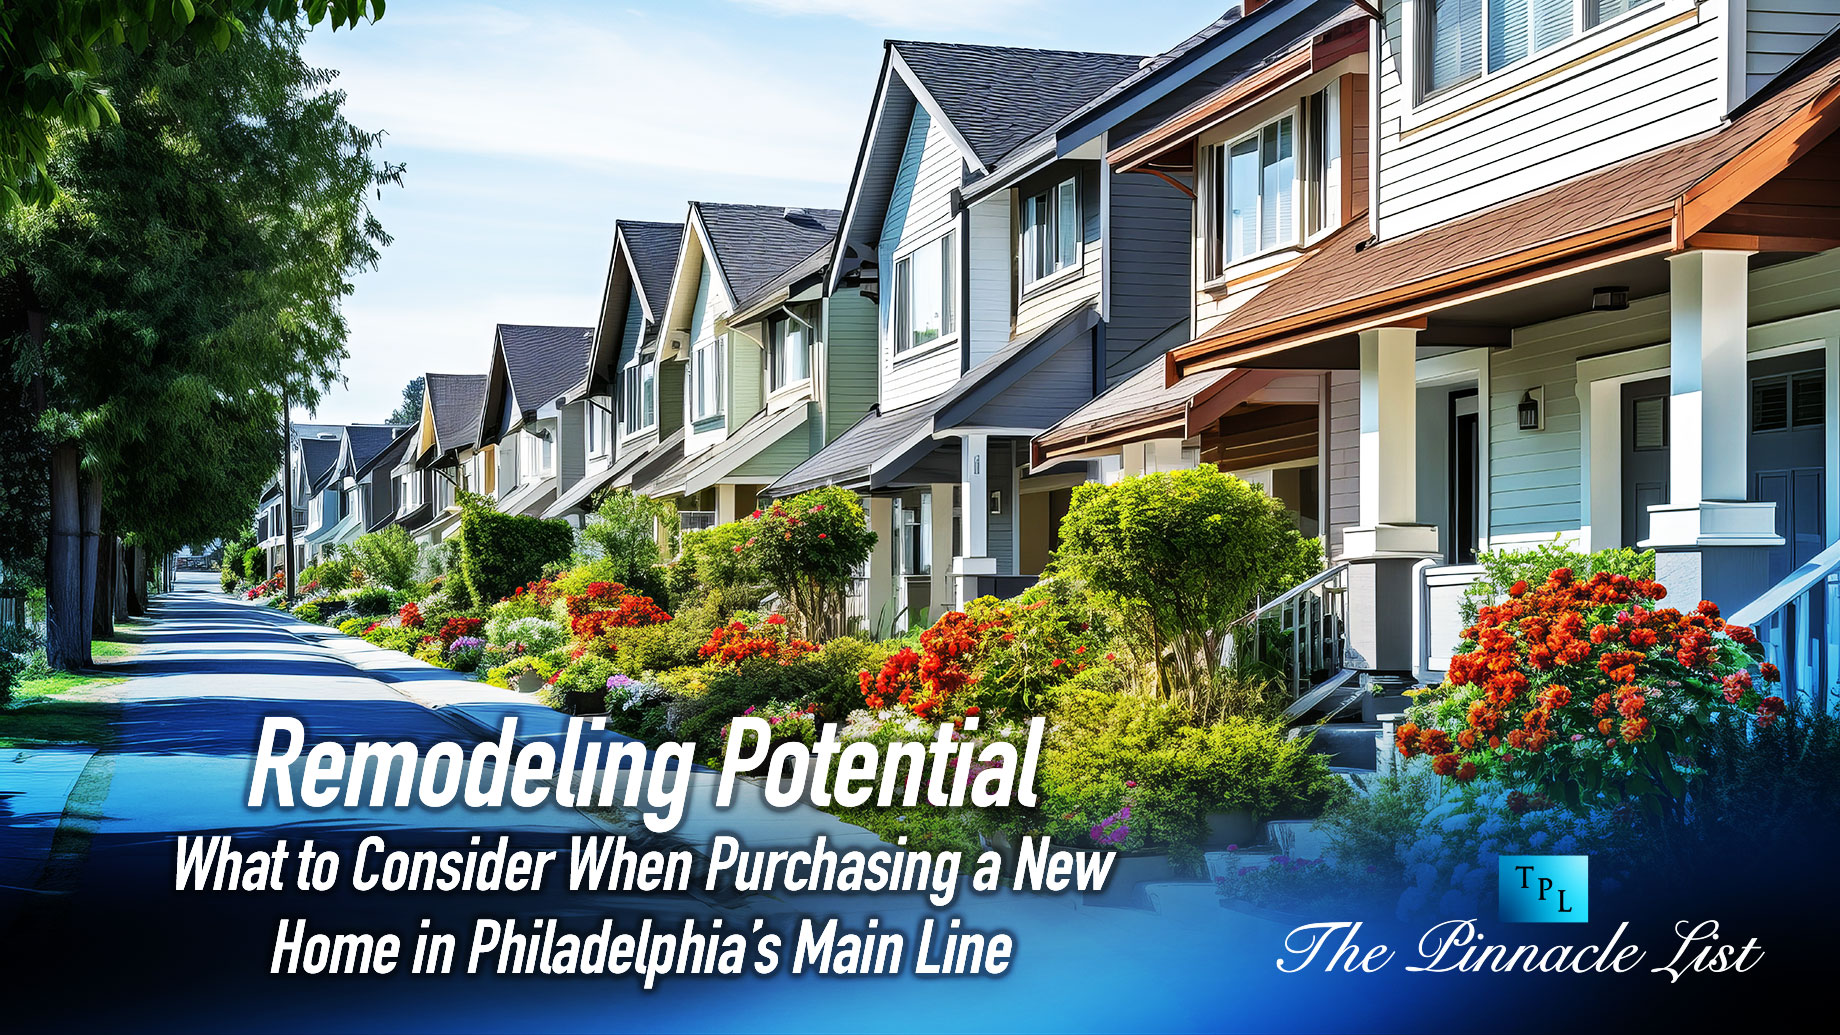 Remodeling Potential: What to Consider When Purchasing a New Home in Philadelphia’s Main Line